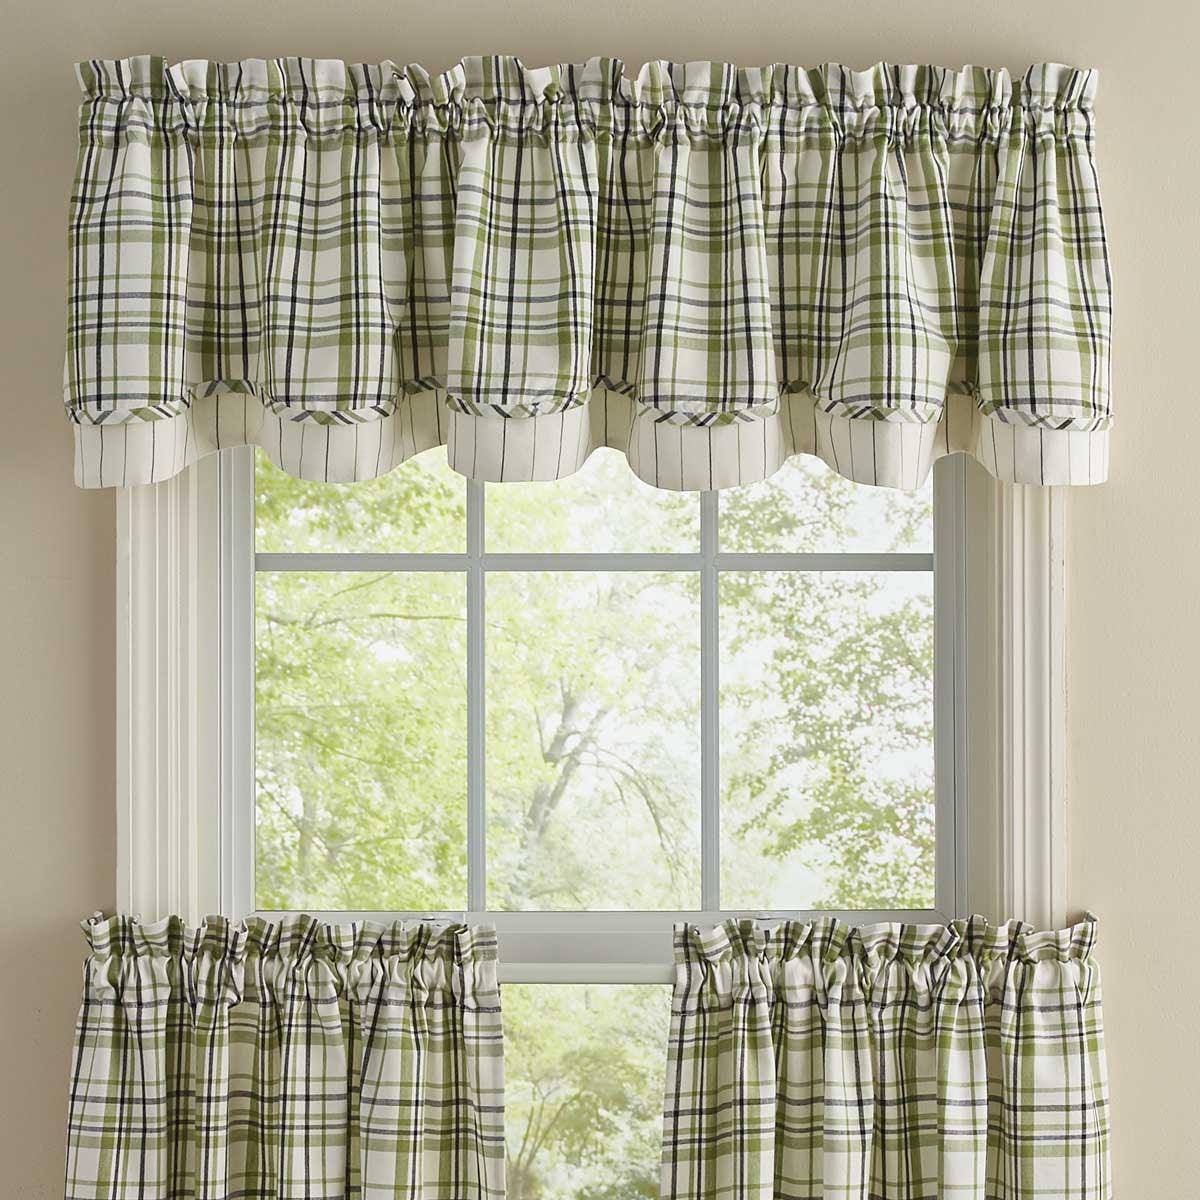 Time In The Garden Valance - Lined Layered Park Designs - The Fox Decor